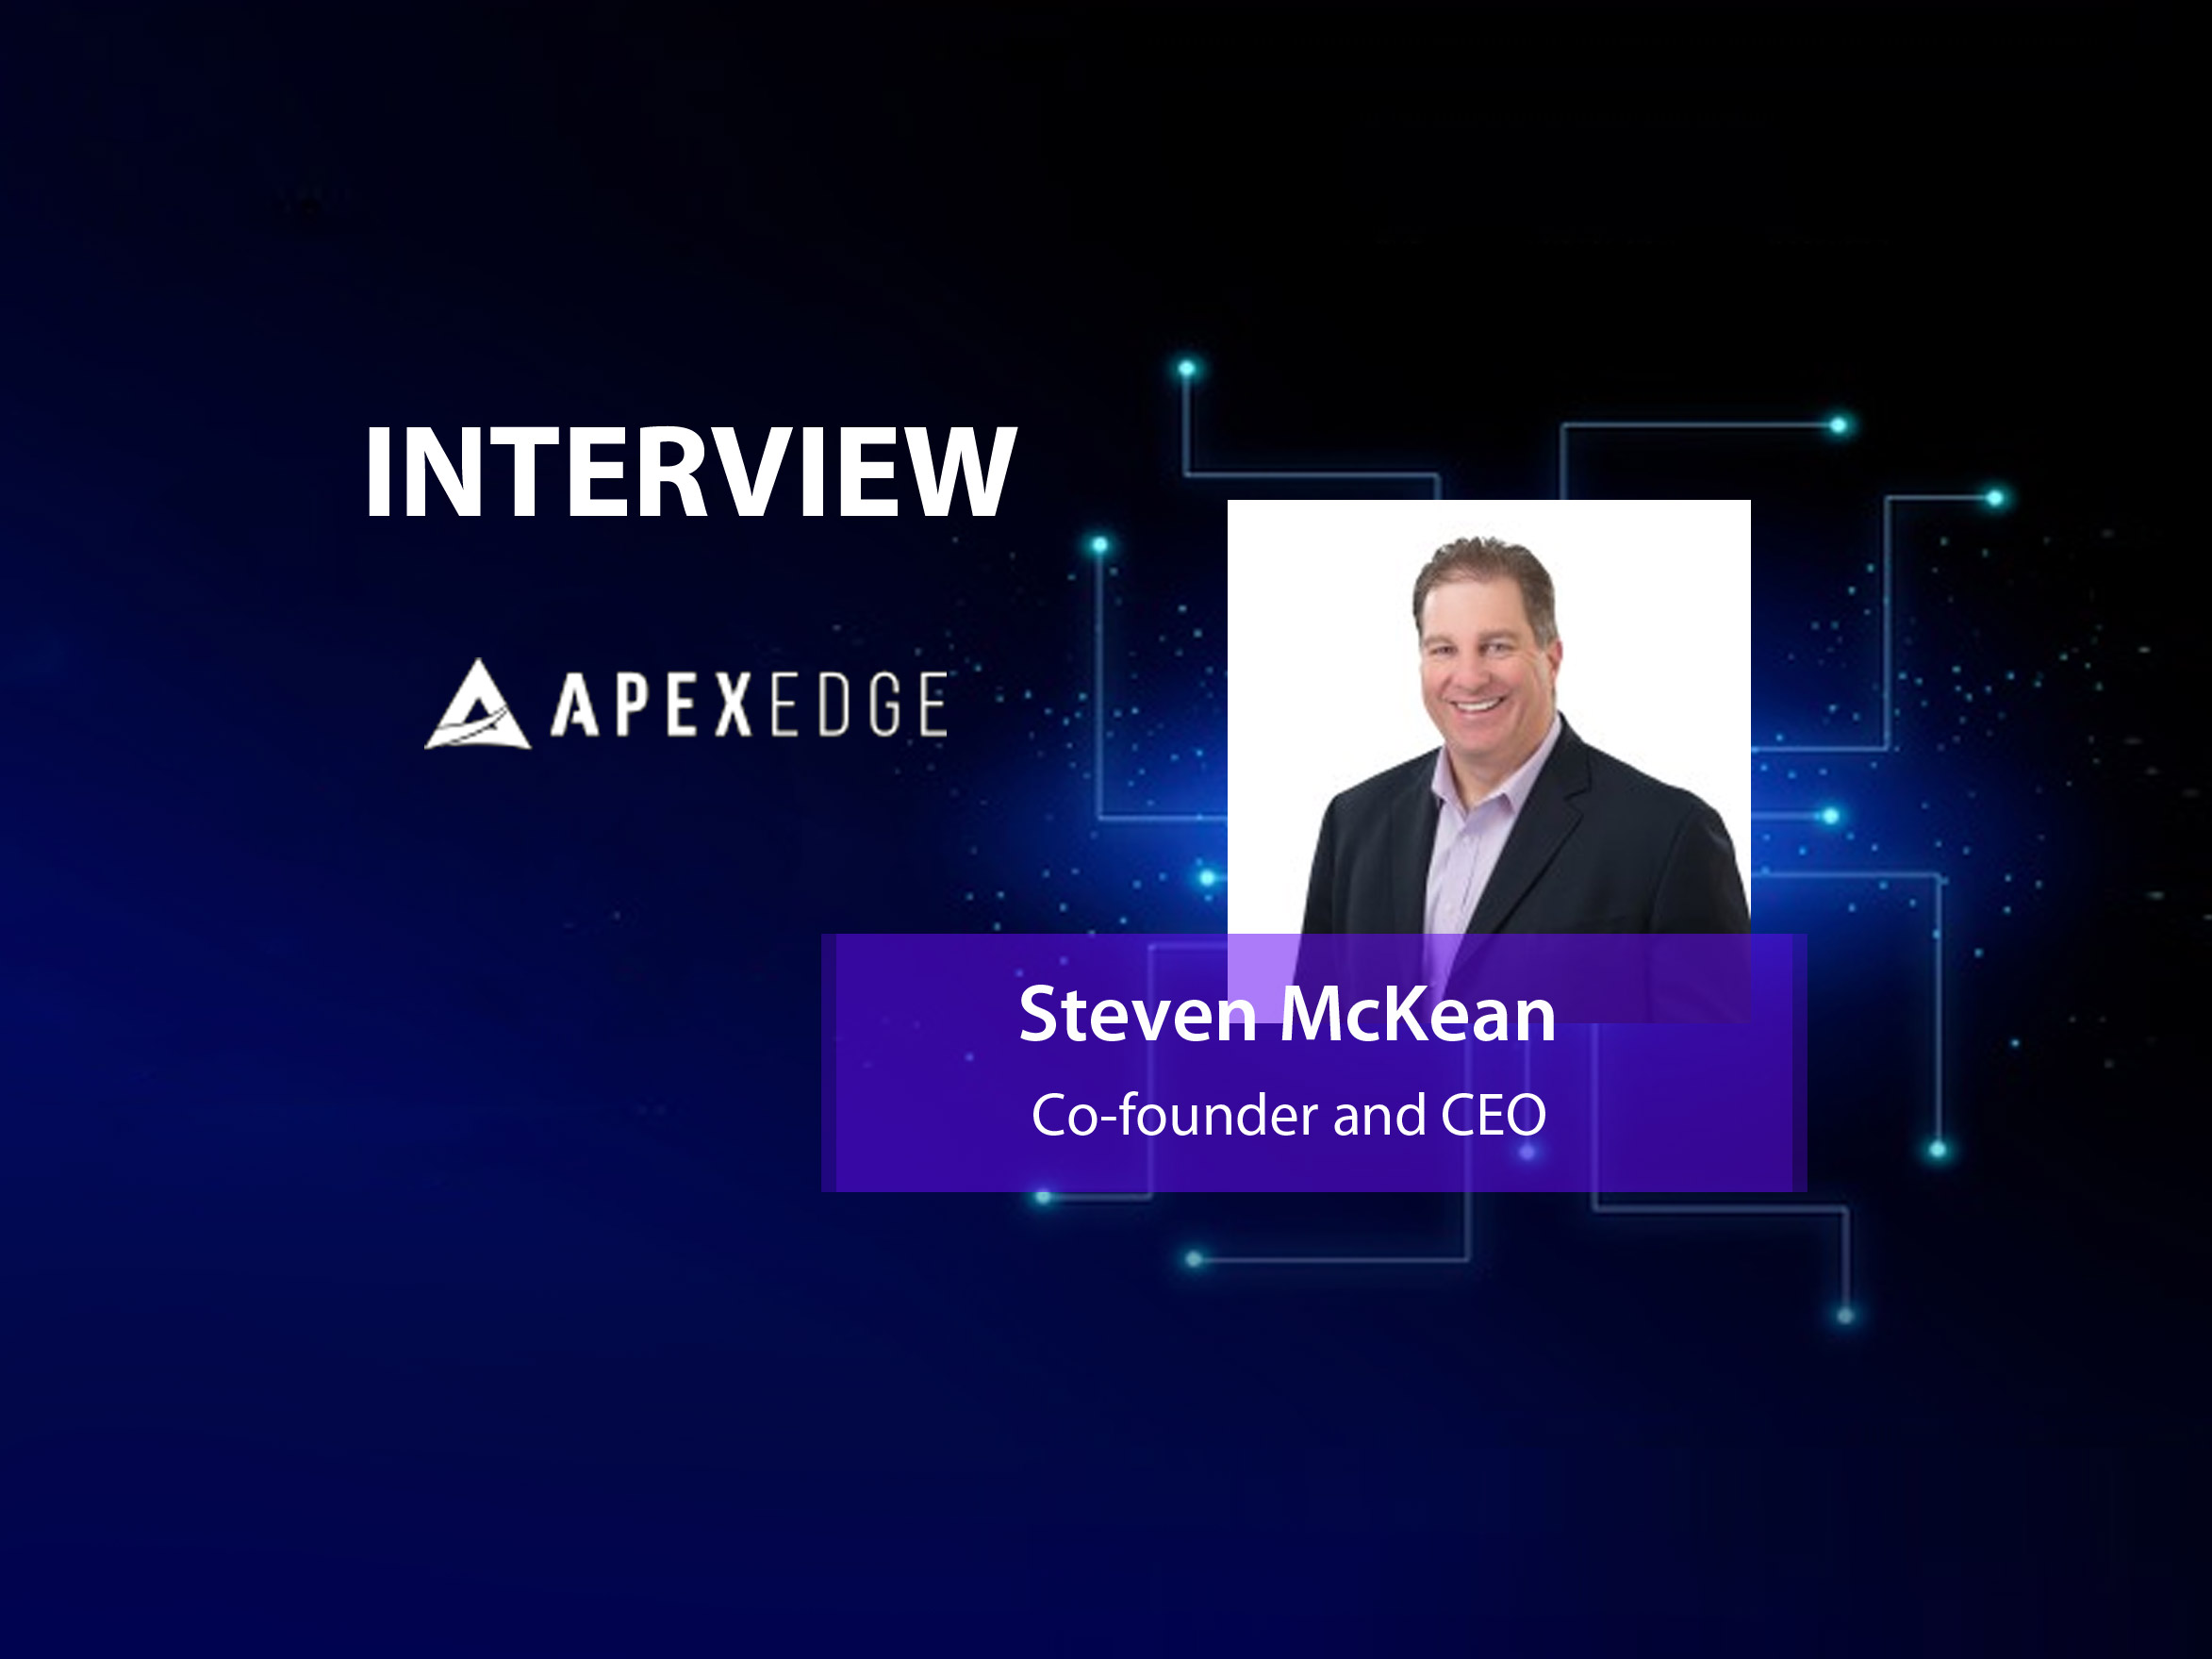 GlobalFintechSeries Interview with Steven McKean, Co-founder and CEO at ApexEdge